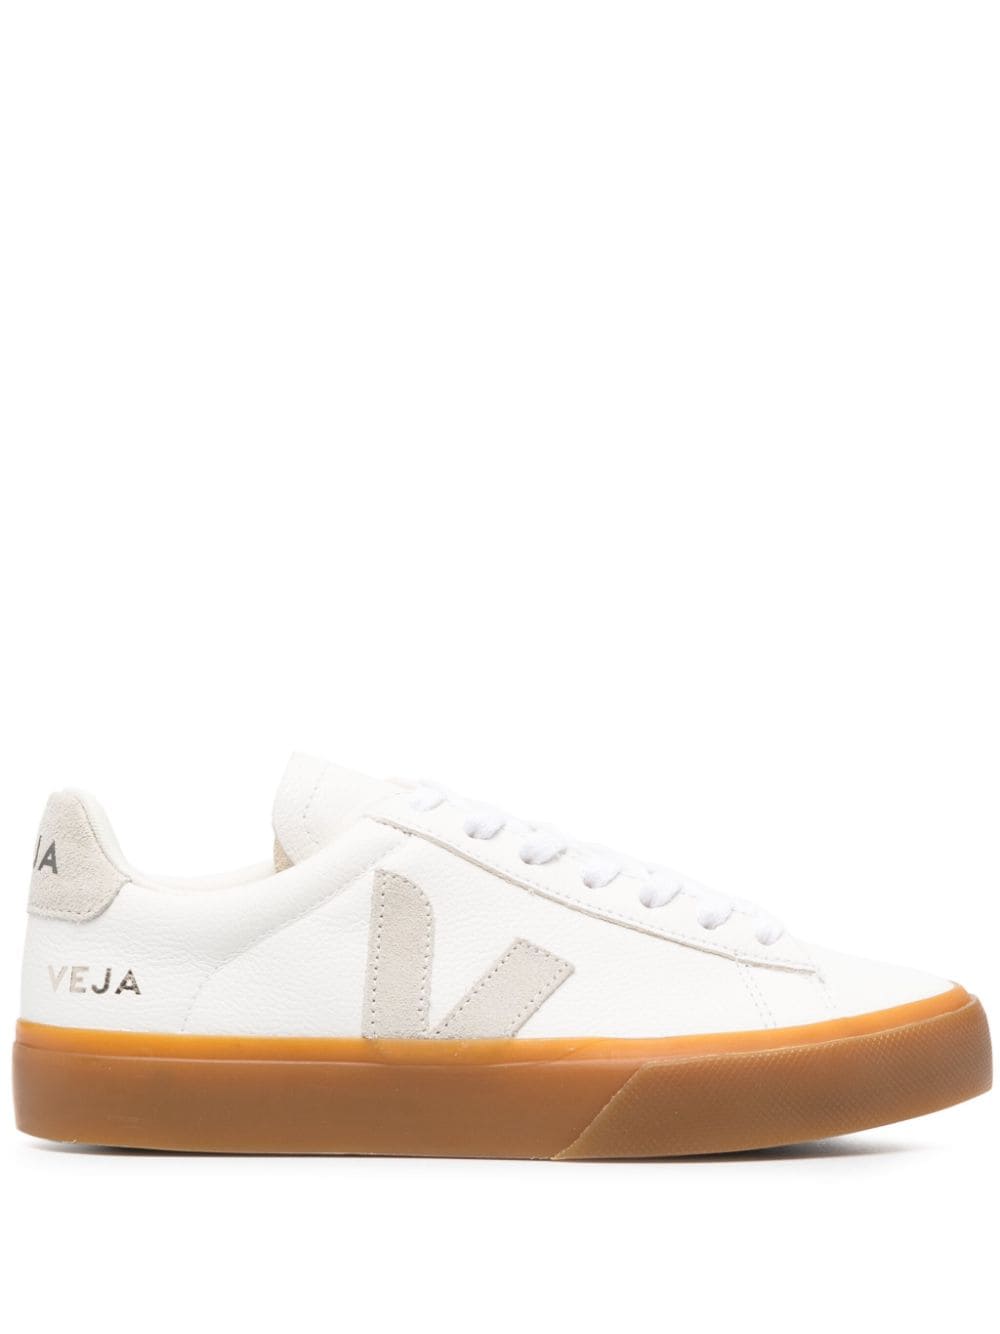 Image 1 of VEJA Campo leather sneakers